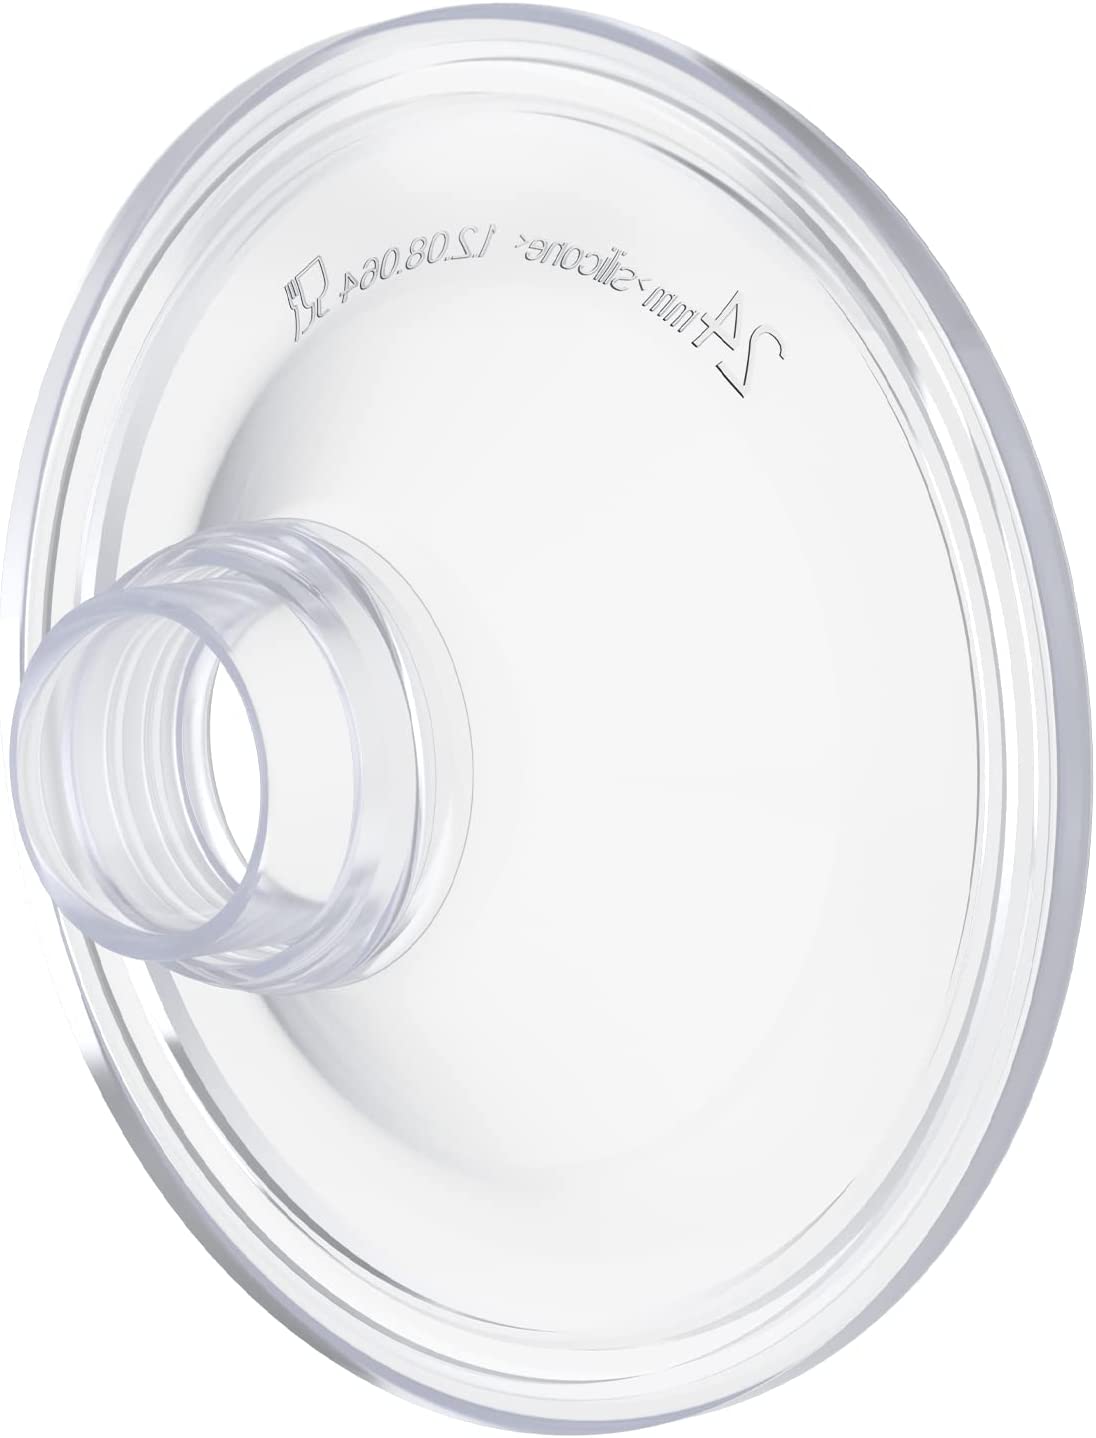 Mamomy Wearable Breast Pump Shield Replacement Suitable for S9/S12,Milk Collector 24mm/27mm Universal